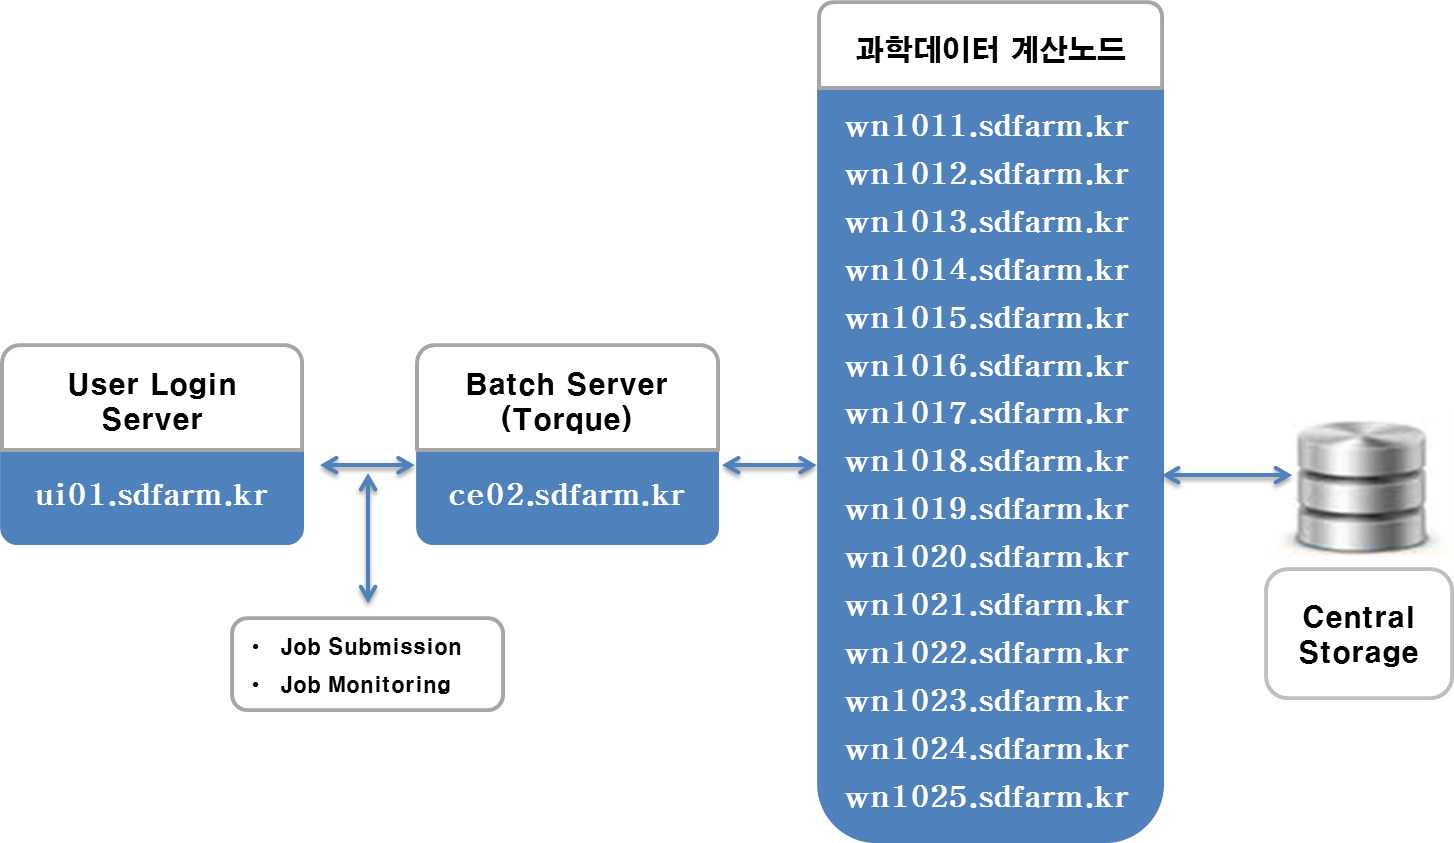 The configuration of Data Farm Testbed